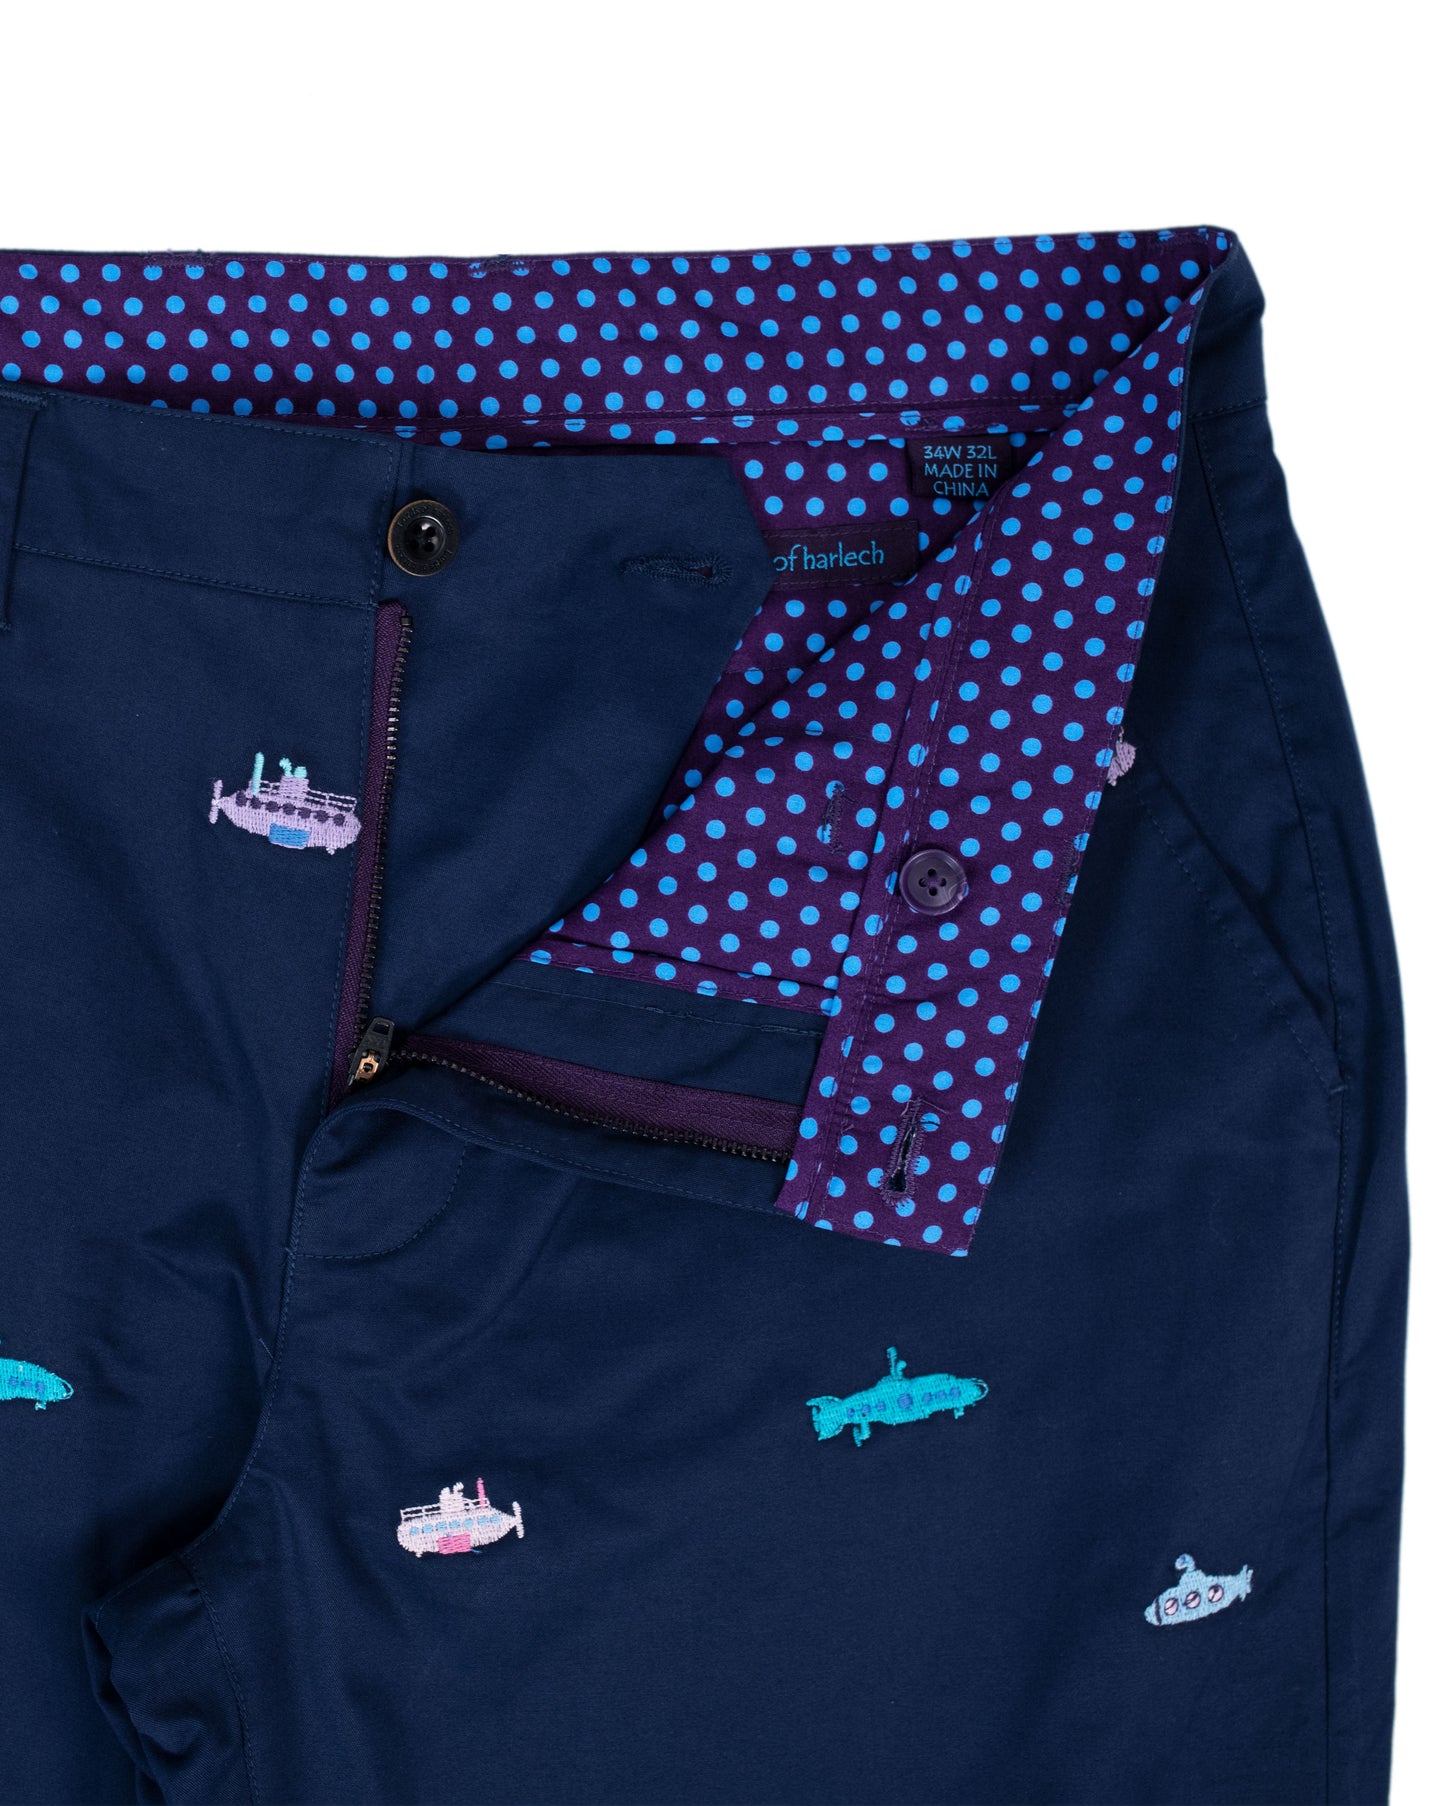 CHARLES SUBS EMBROIDERY PANTS IN NAVY